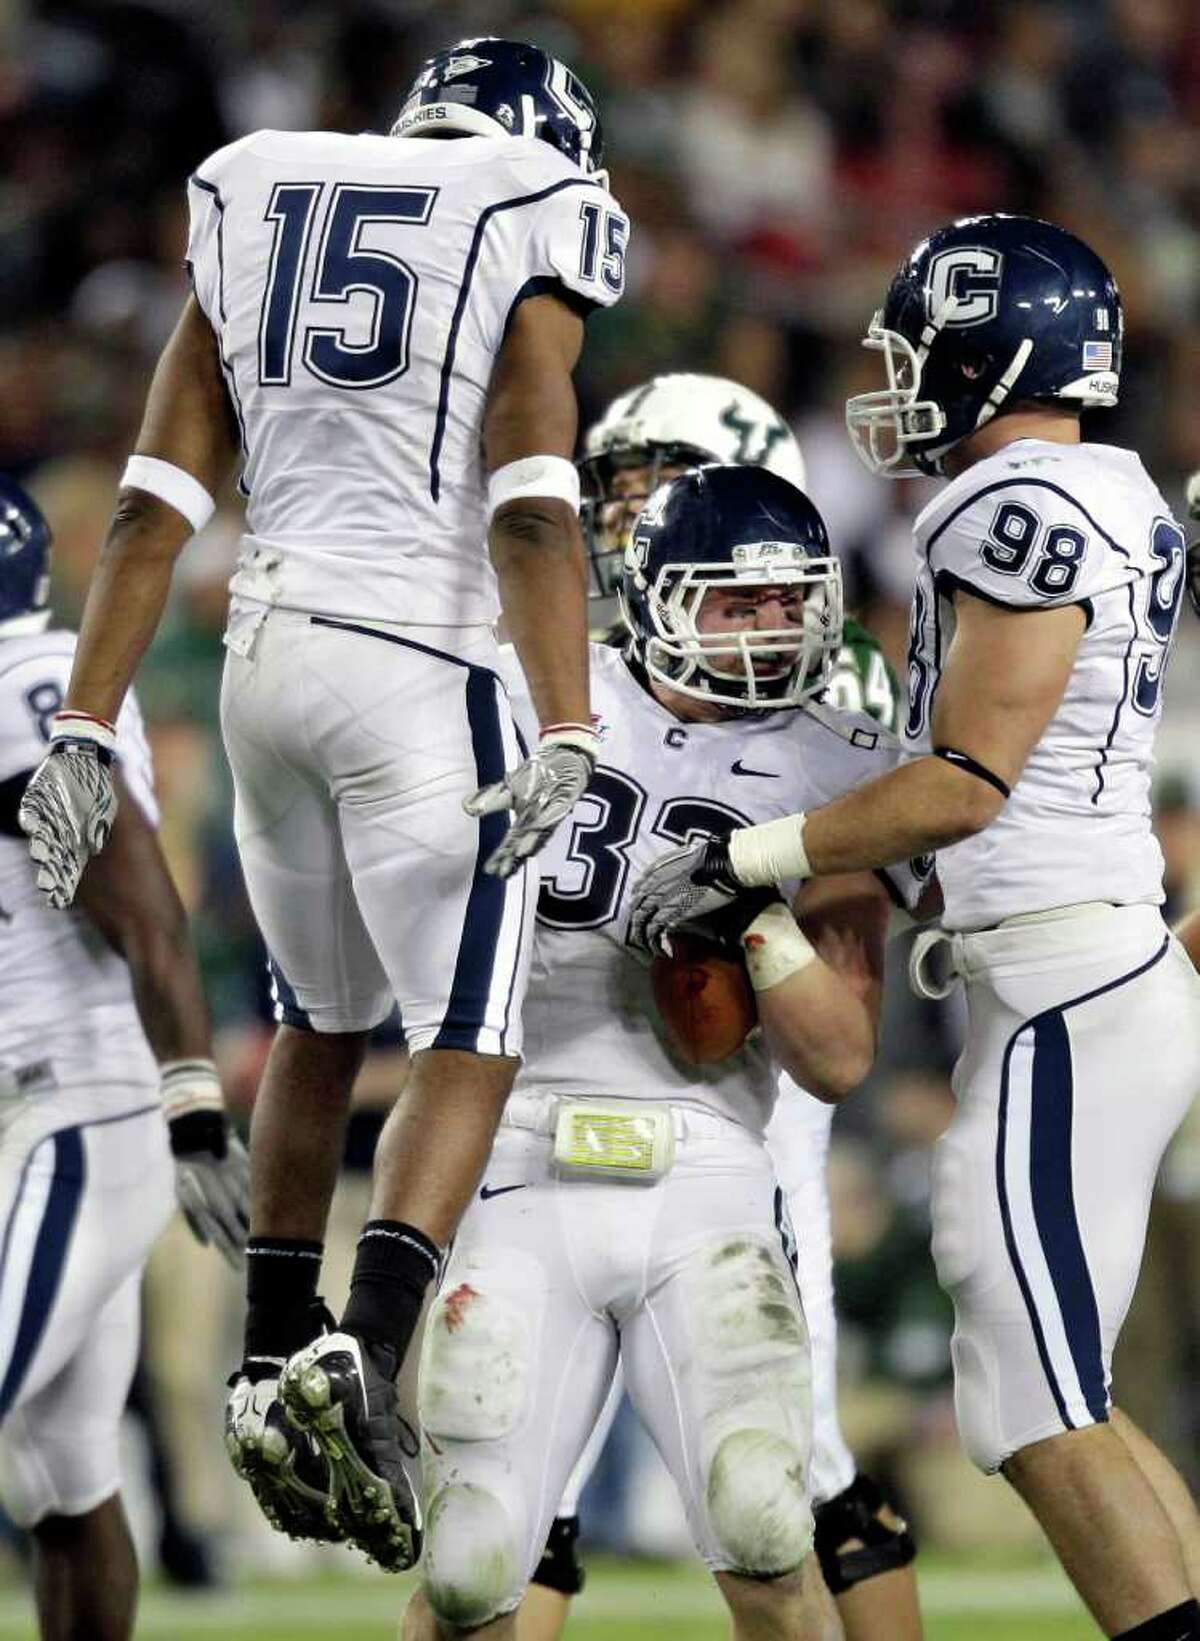 Connecticut linebacker Scott Lutrus (32) celebrates with teammates Jerome Junior (15) and Ted Jennings (98) after intercepting a South Florida pass during the first quarter of an NCAA college football game Saturday, Dec. 4, 2010, in Tampa, Fla. (AP Photo/Chris O'Meara)